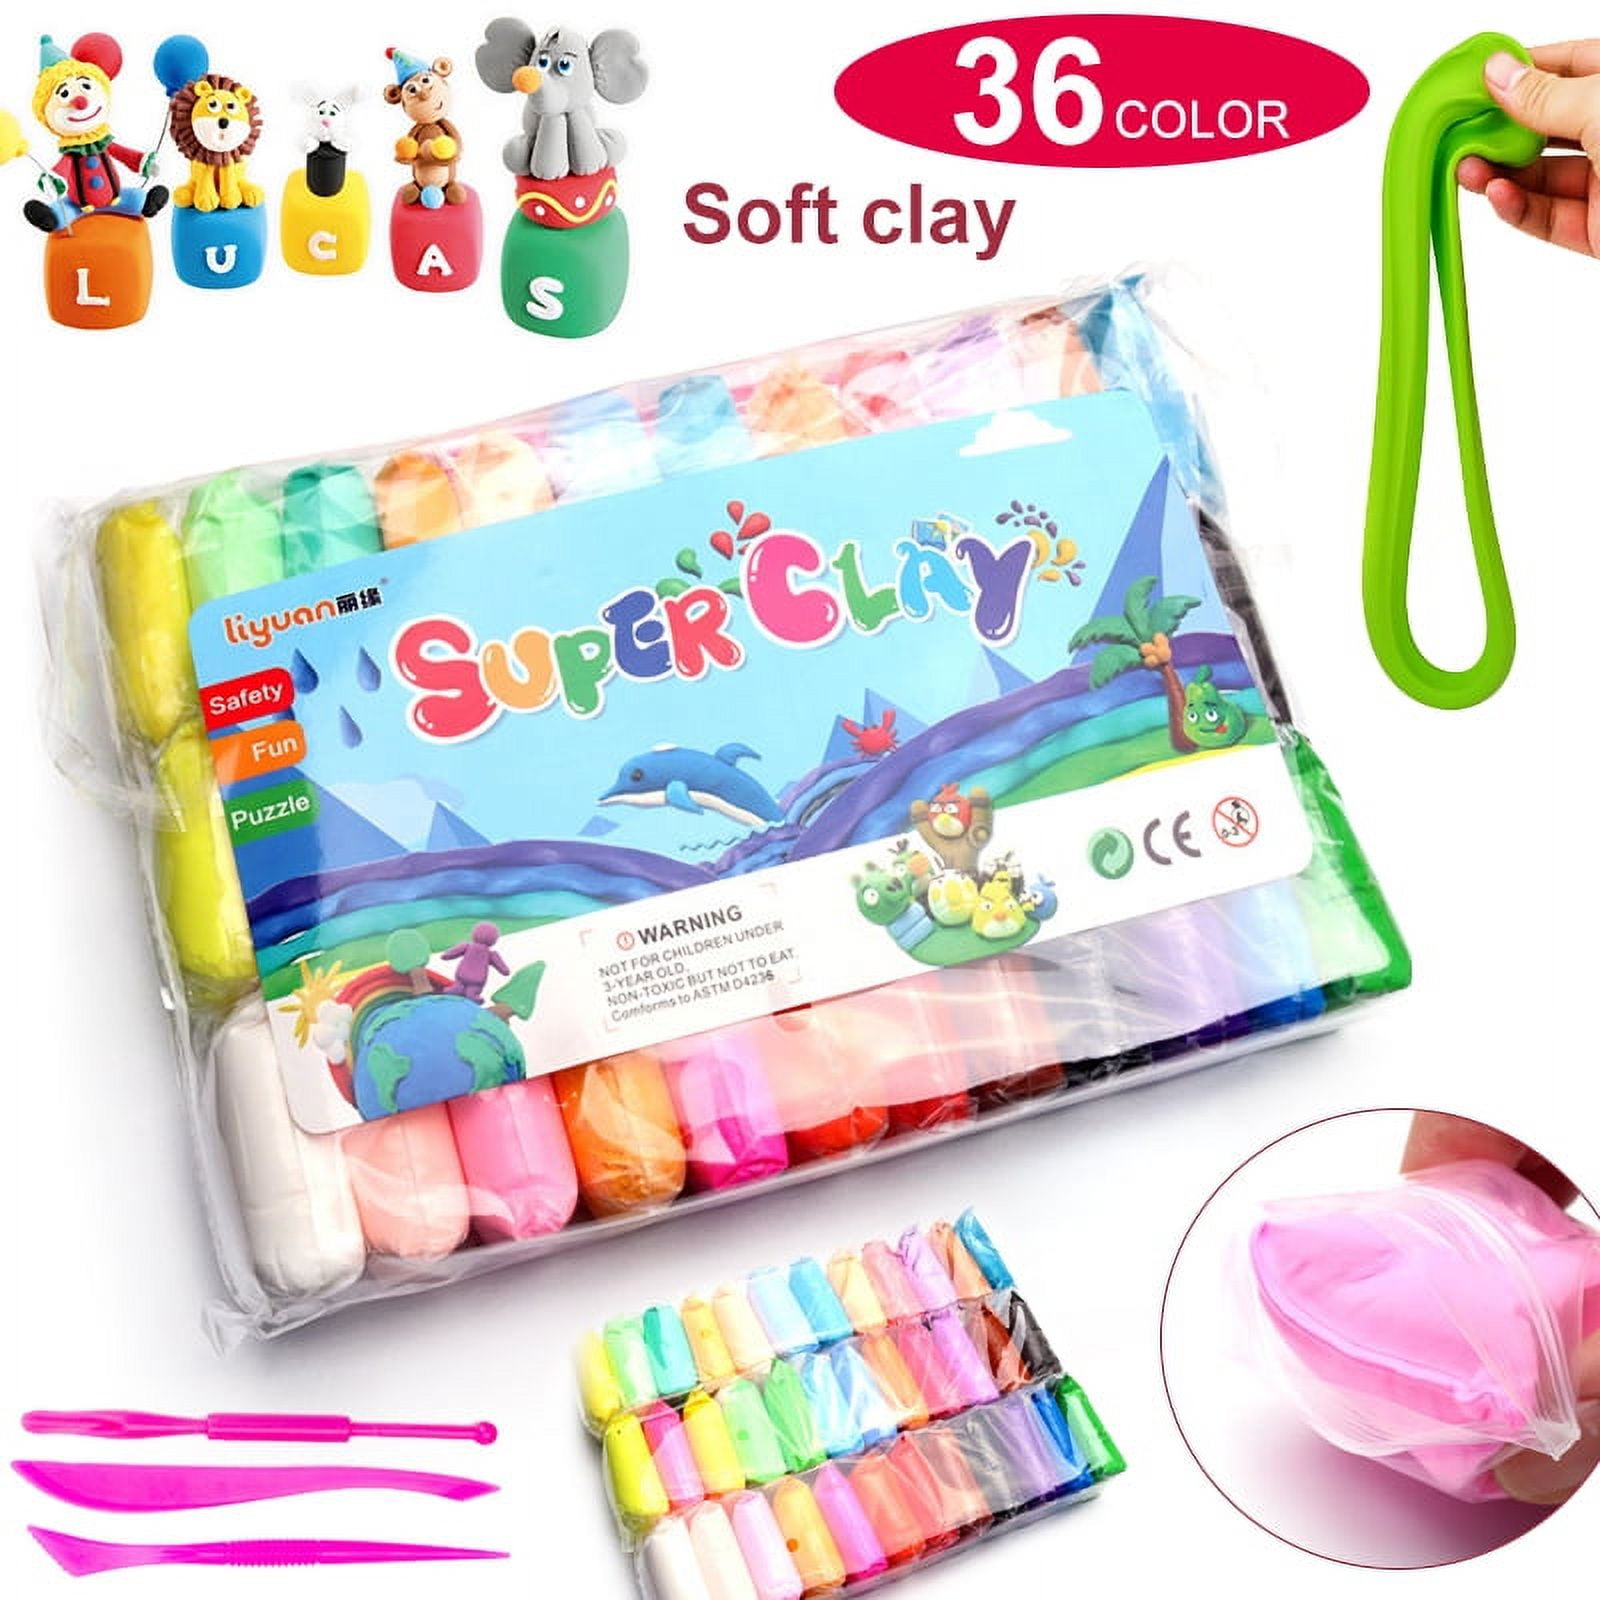 EDIFON Air Dry Clay, 24 Colors DIY Modeling Clay for Kids, Ultra Light Magic Clay with Sculpting Tools, Non-Toxic and Eco-Friendly Clay, Other